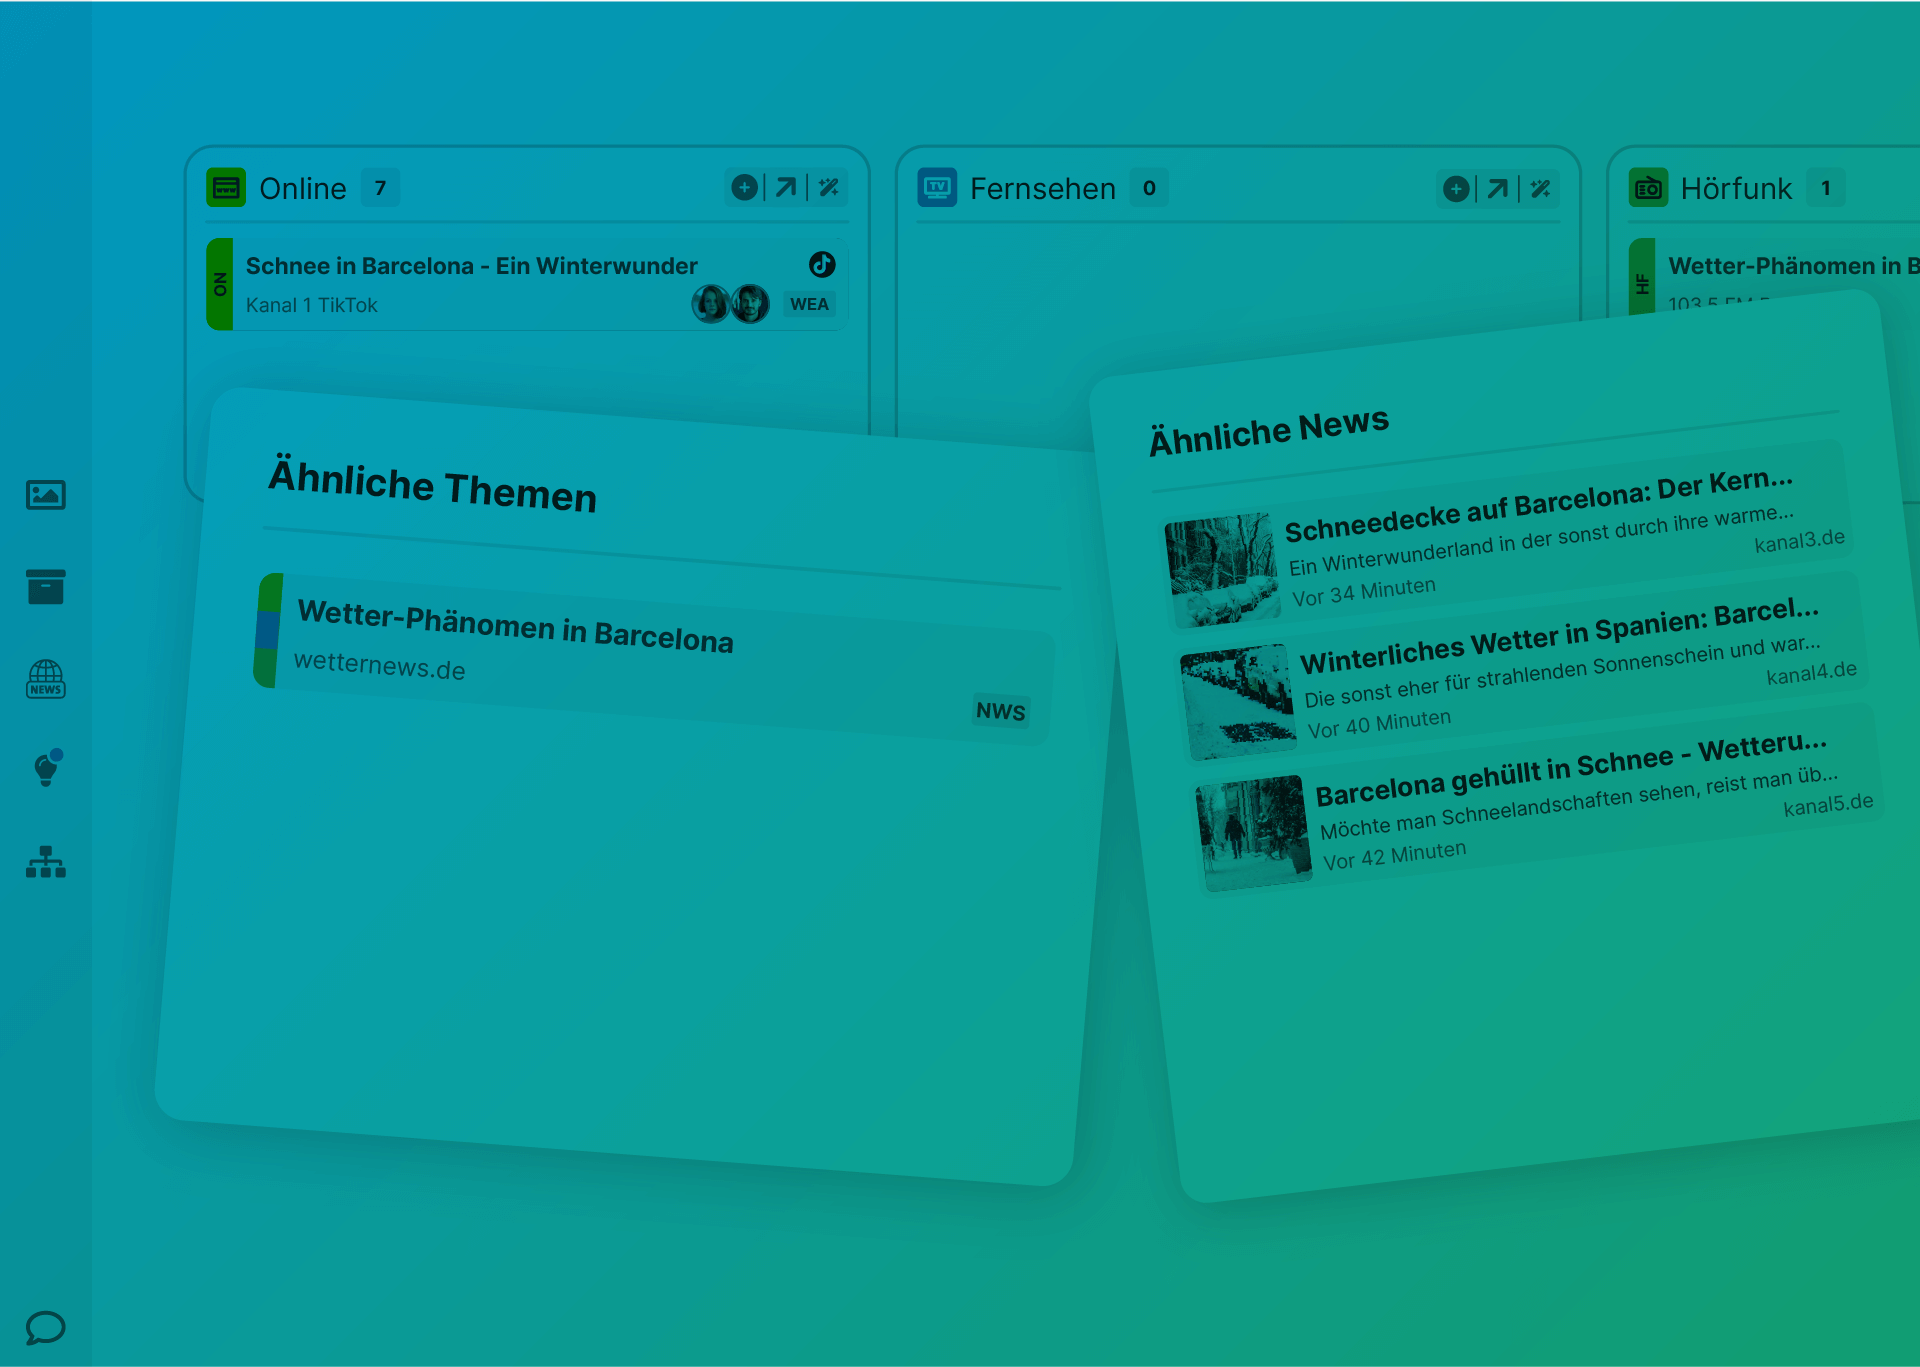 Was sind unsere KI-Features Related News und Related Topics?